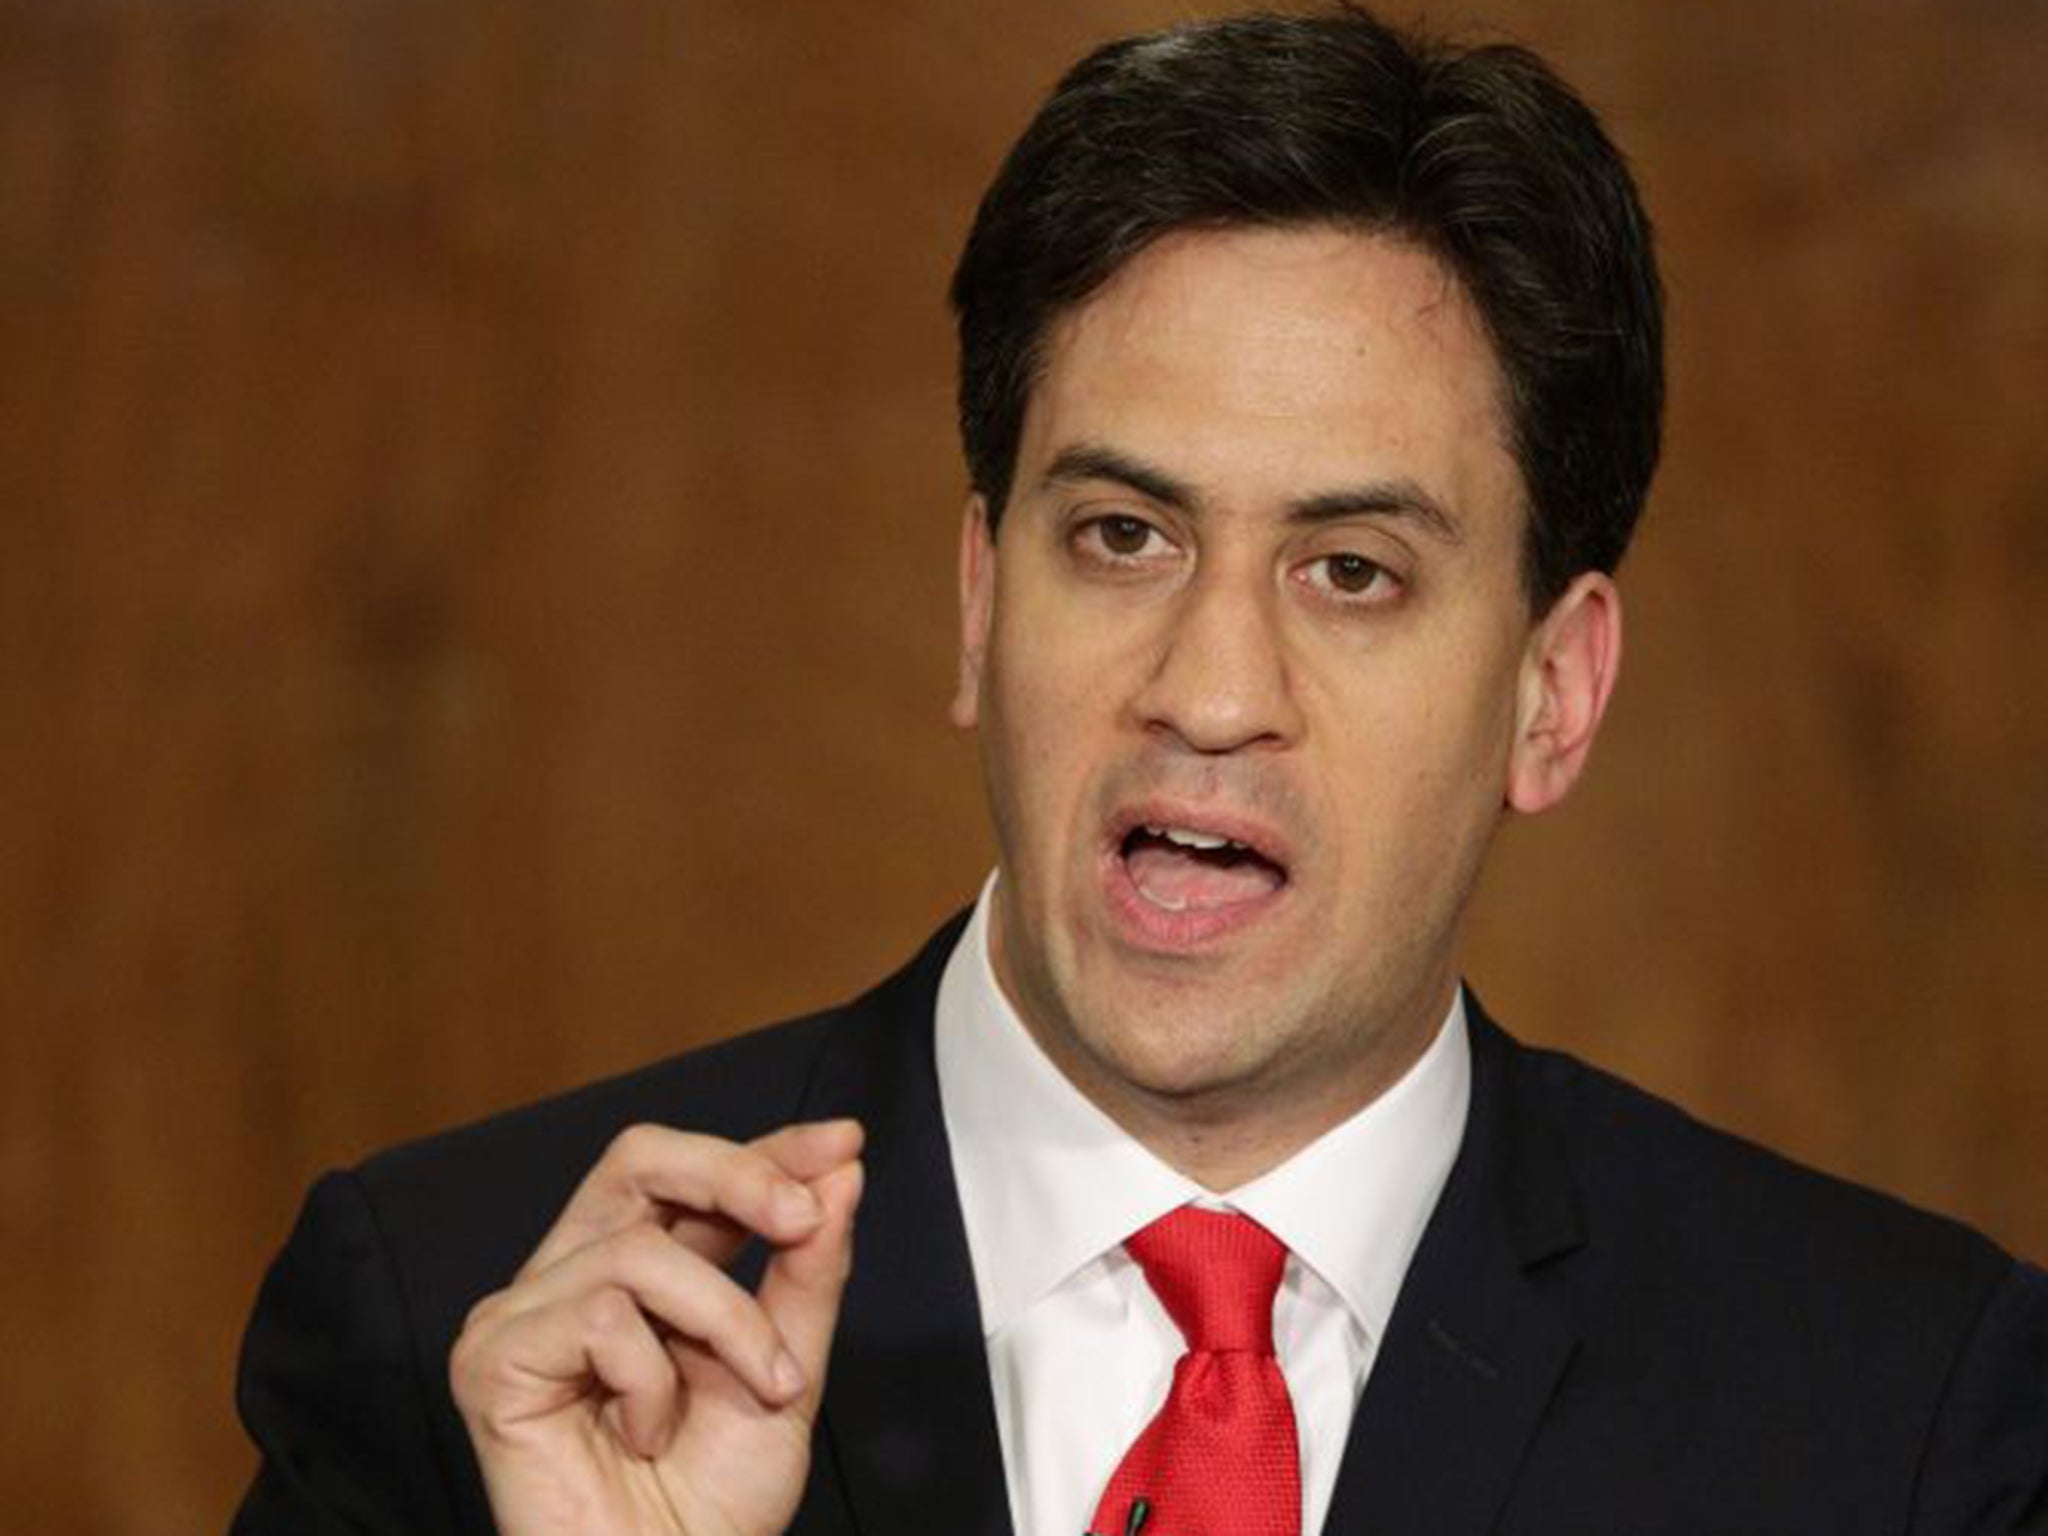 Ed Miliband spoke out in the Commons about the closure of Hatfield Colliery